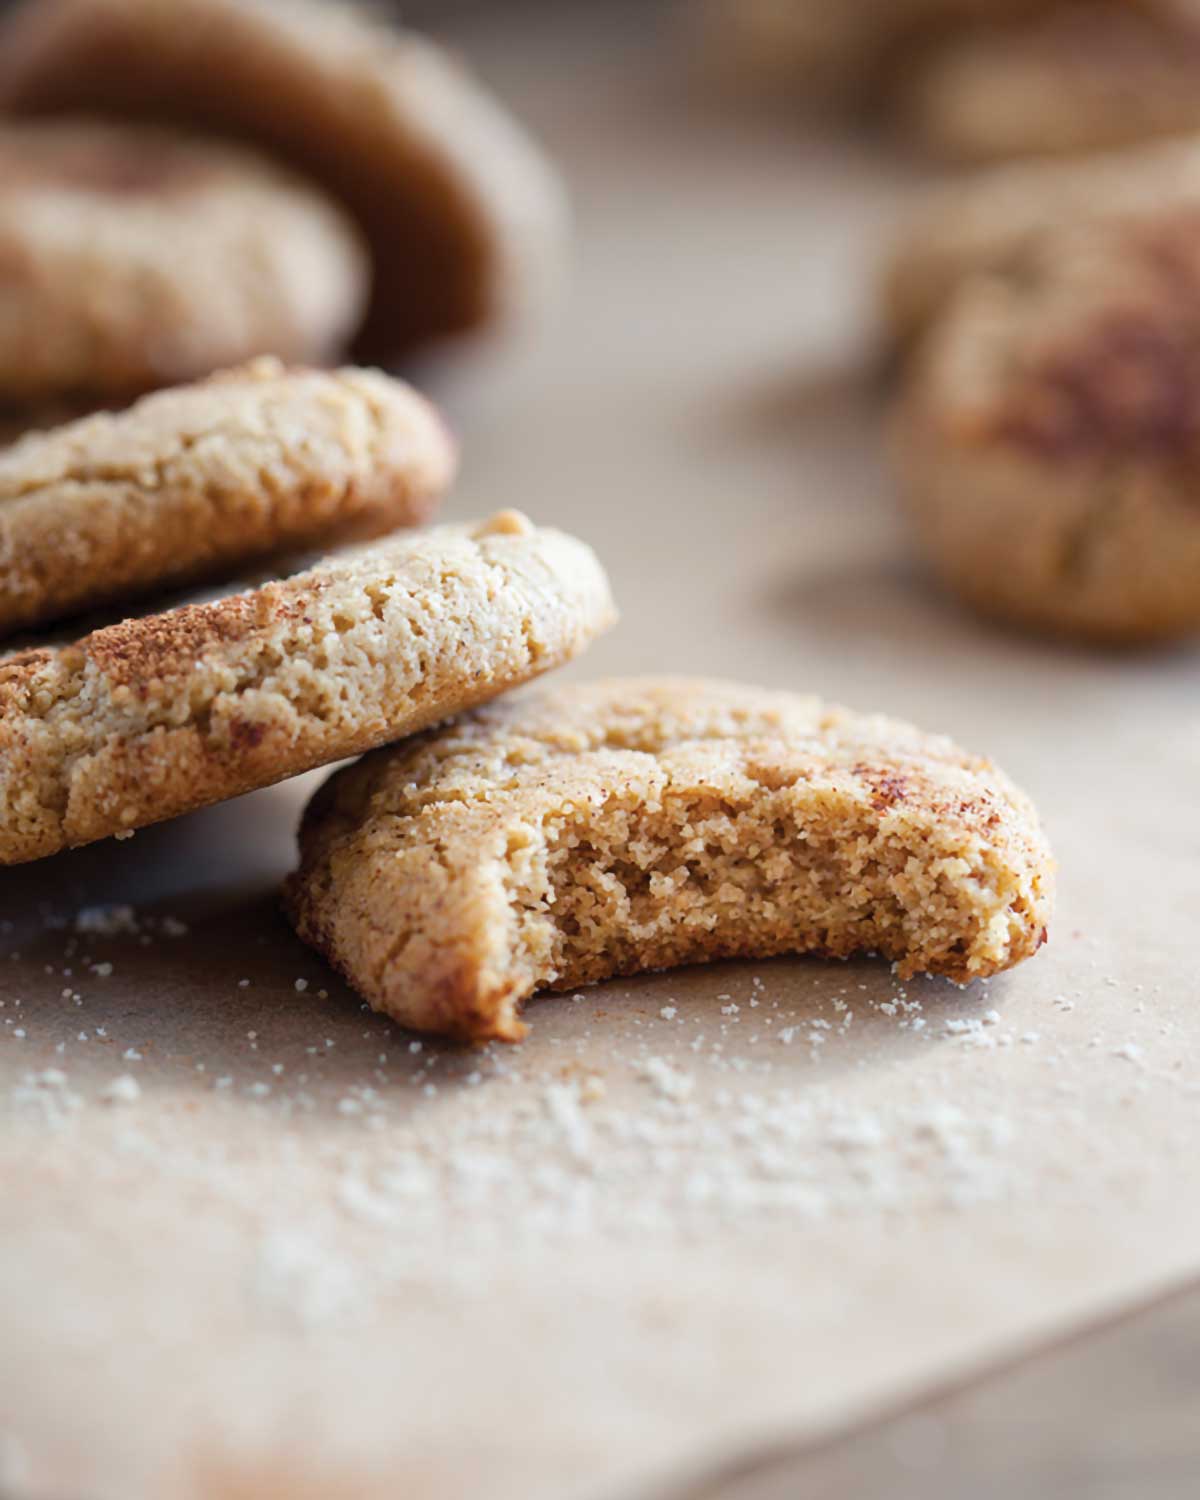 Several paleo snickerdoodles scattered on a table, one with a bite out of it.